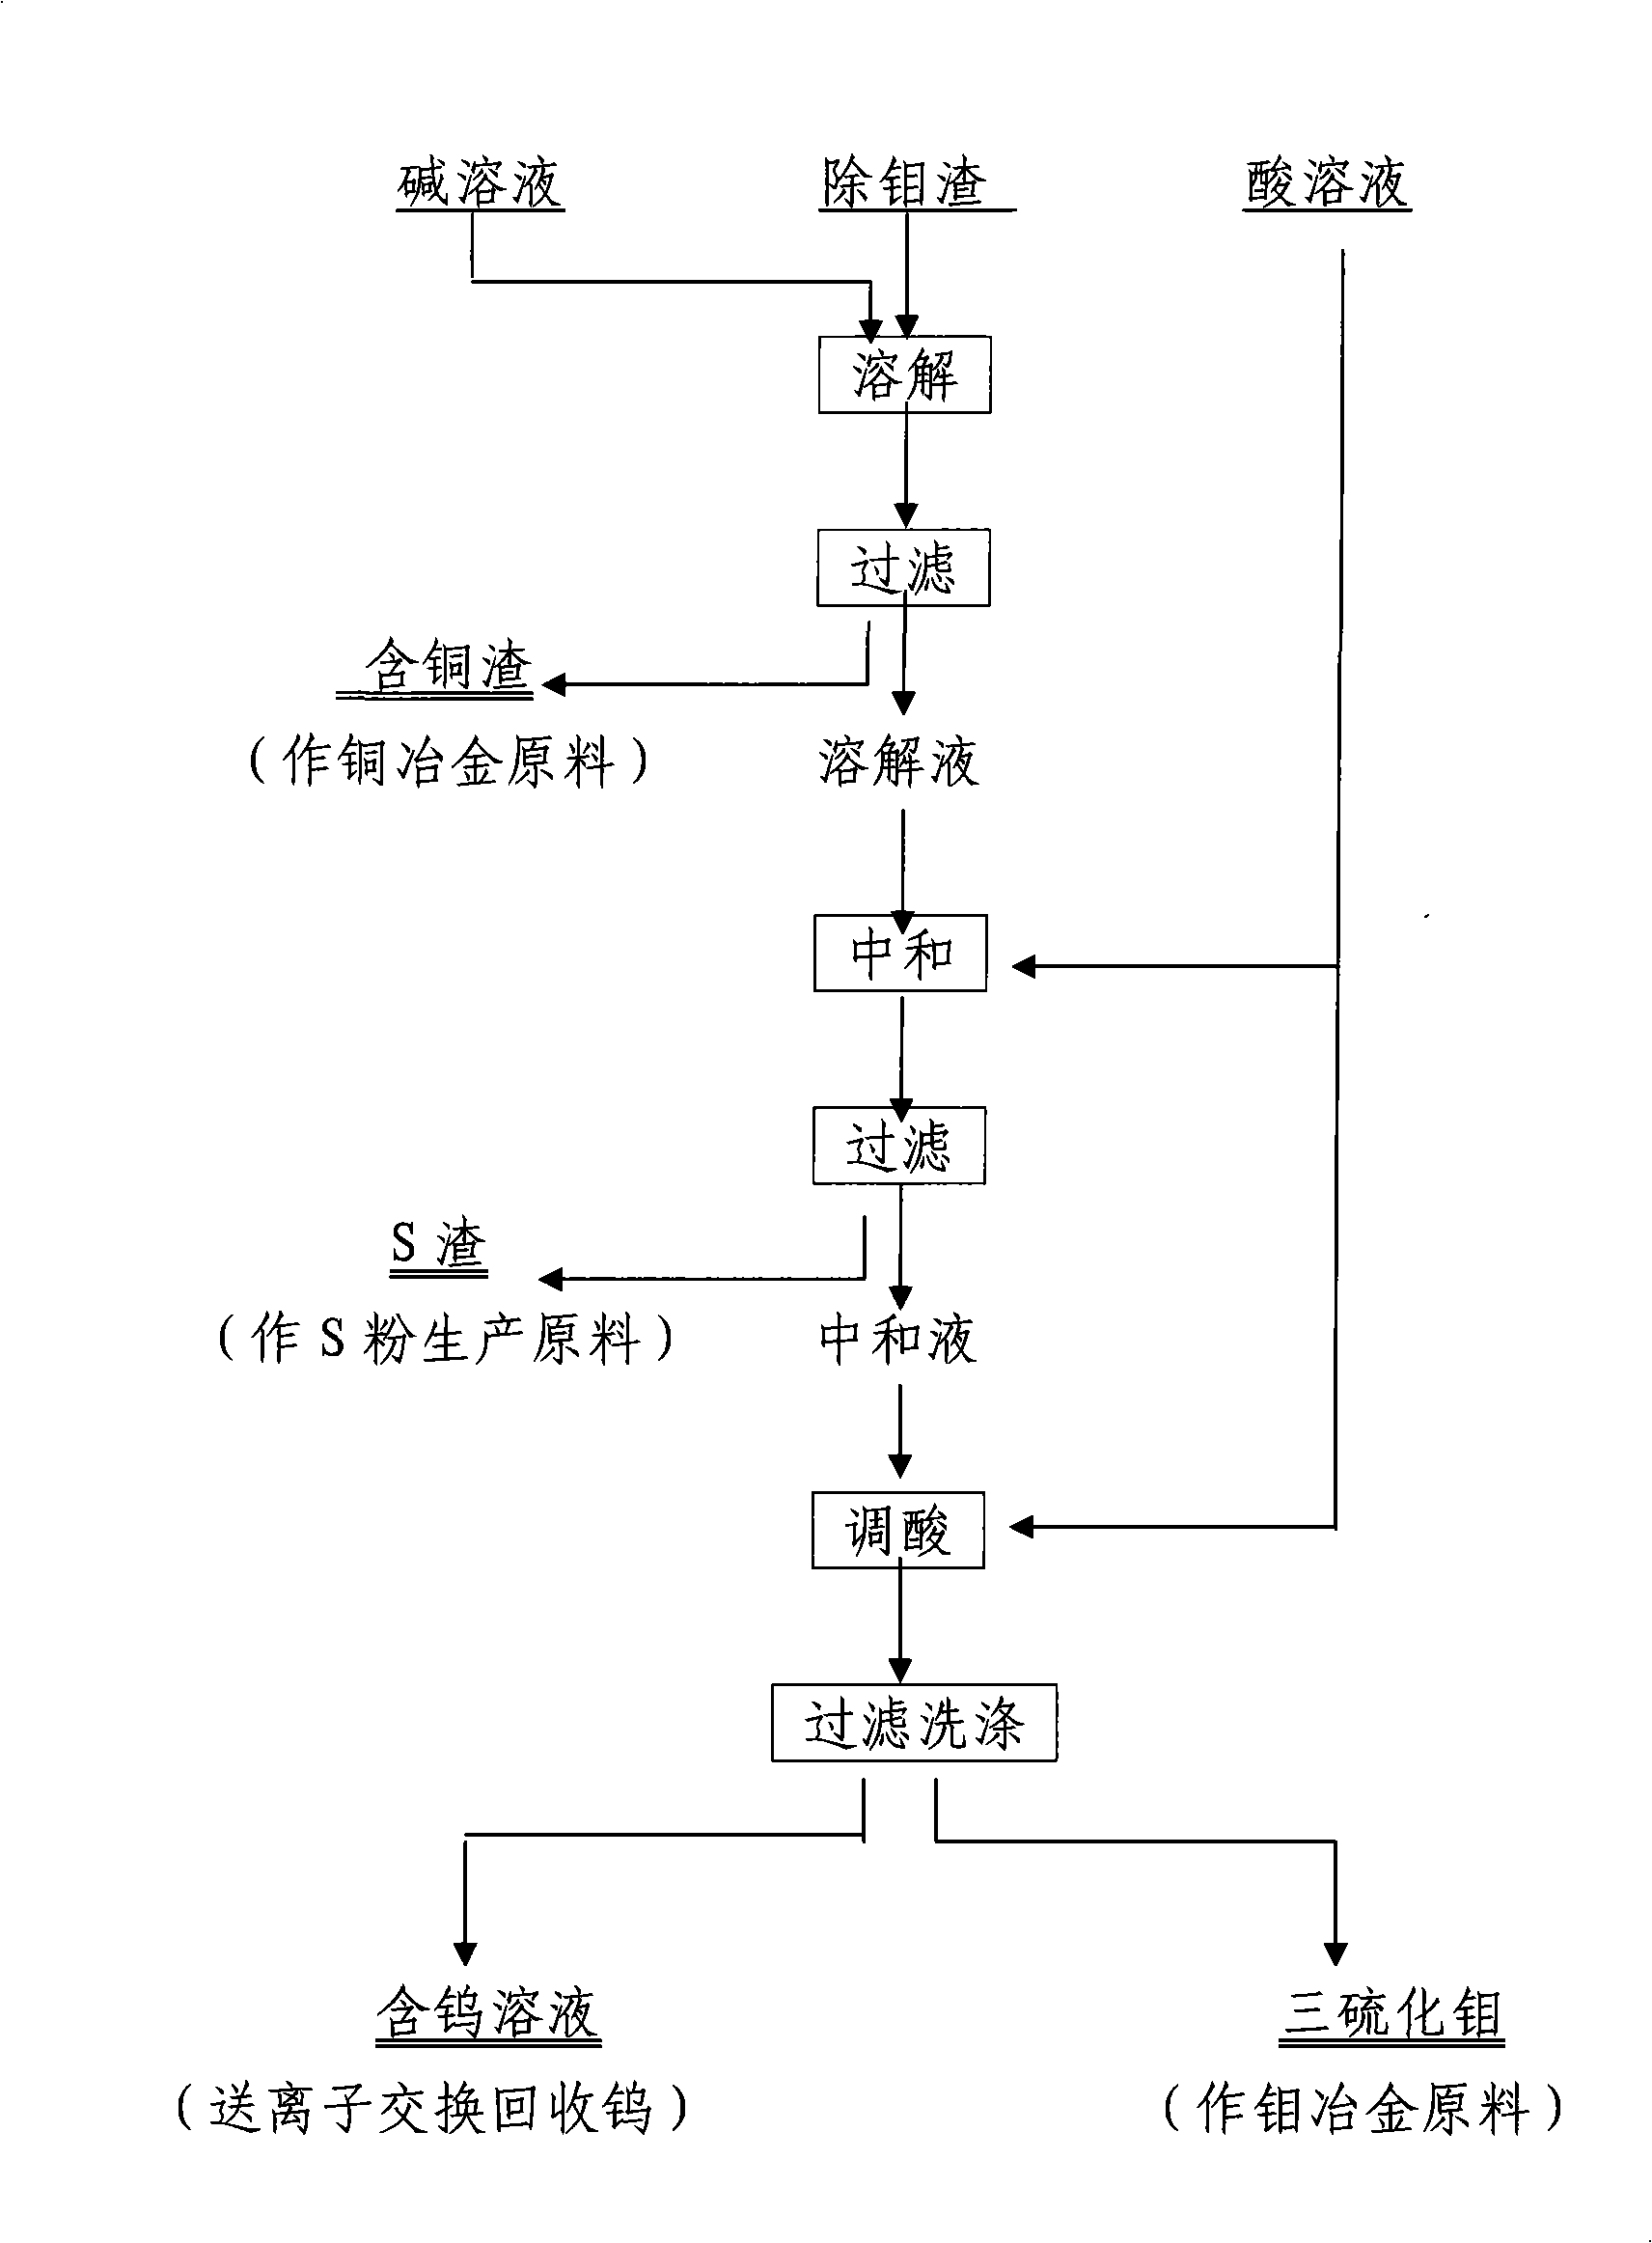 Method for separating and extracting metallic tungsten and molybdenum from molybdenum removal slag generated by smelting tungsten